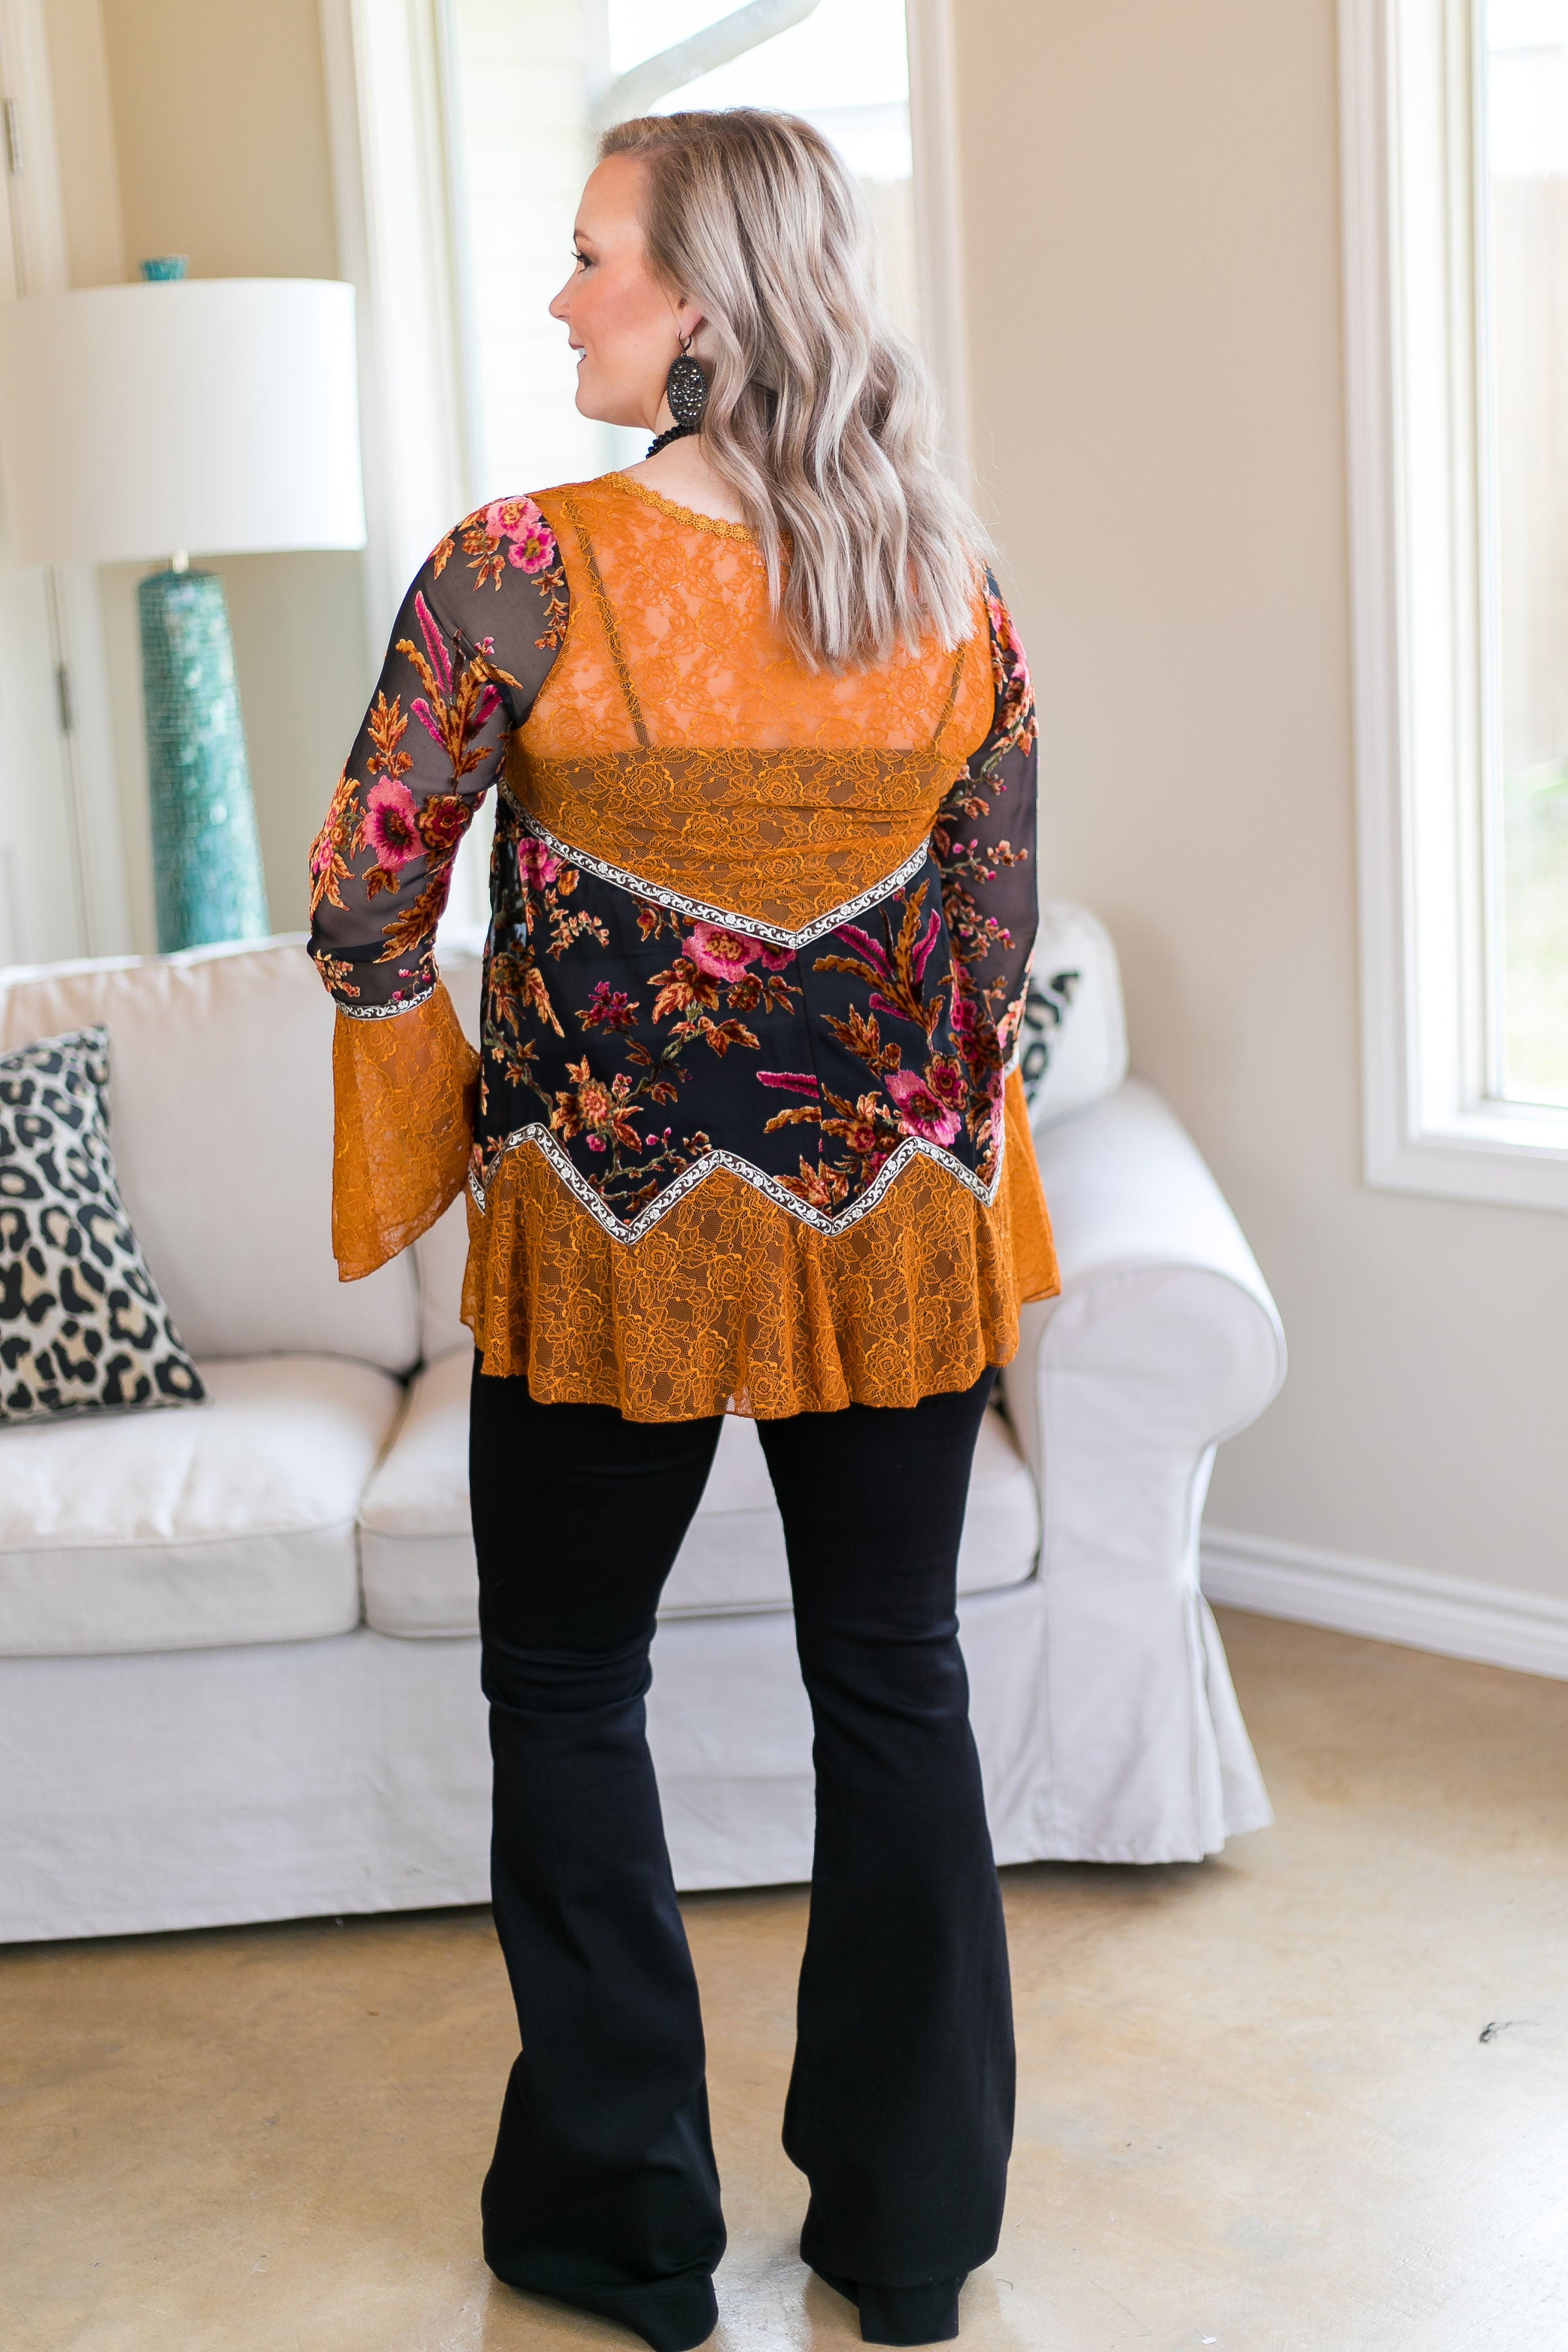 Last Chance Size Small & Med. | She's Fancy Floral Velvet and Lace Top in Rust Orange - Giddy Up Glamour Boutique